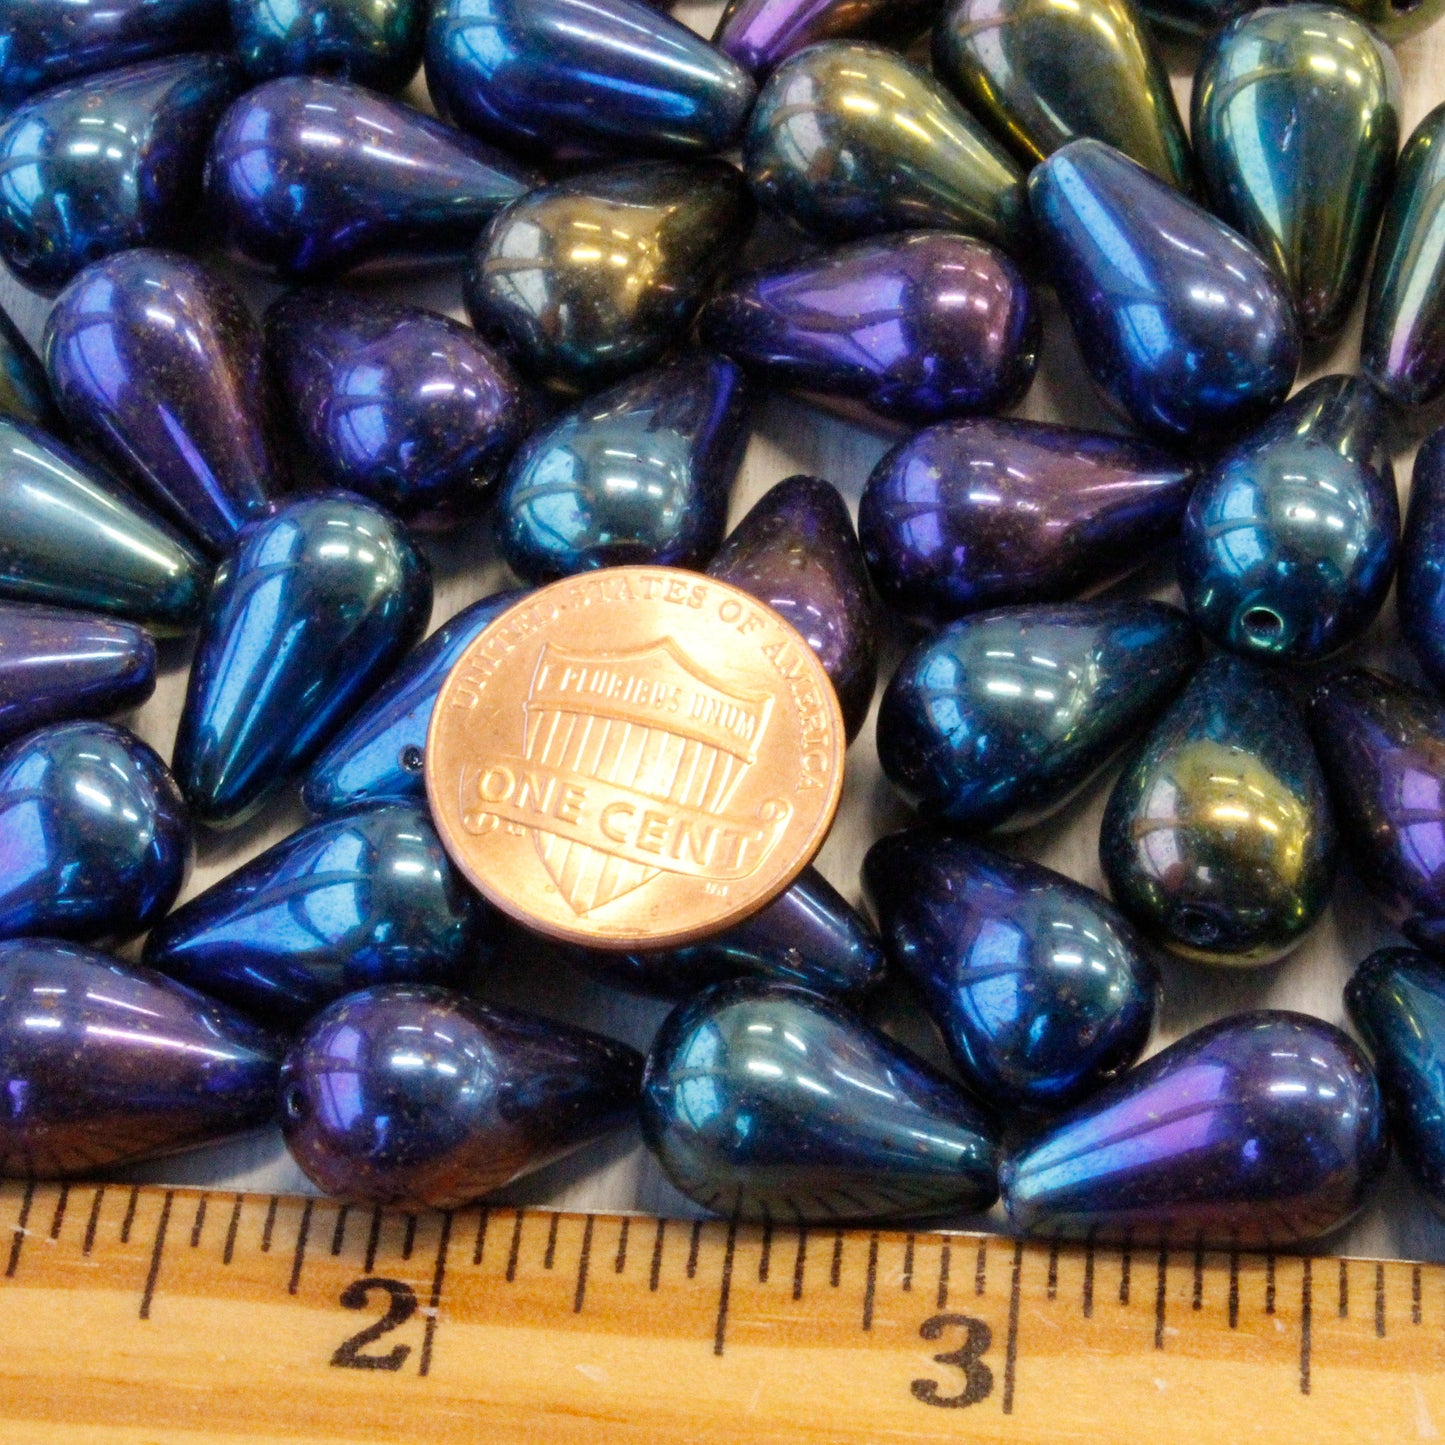 Load image into Gallery viewer, 11x18mm Long Drilled Drops - Blue Iris - 30 Beads
